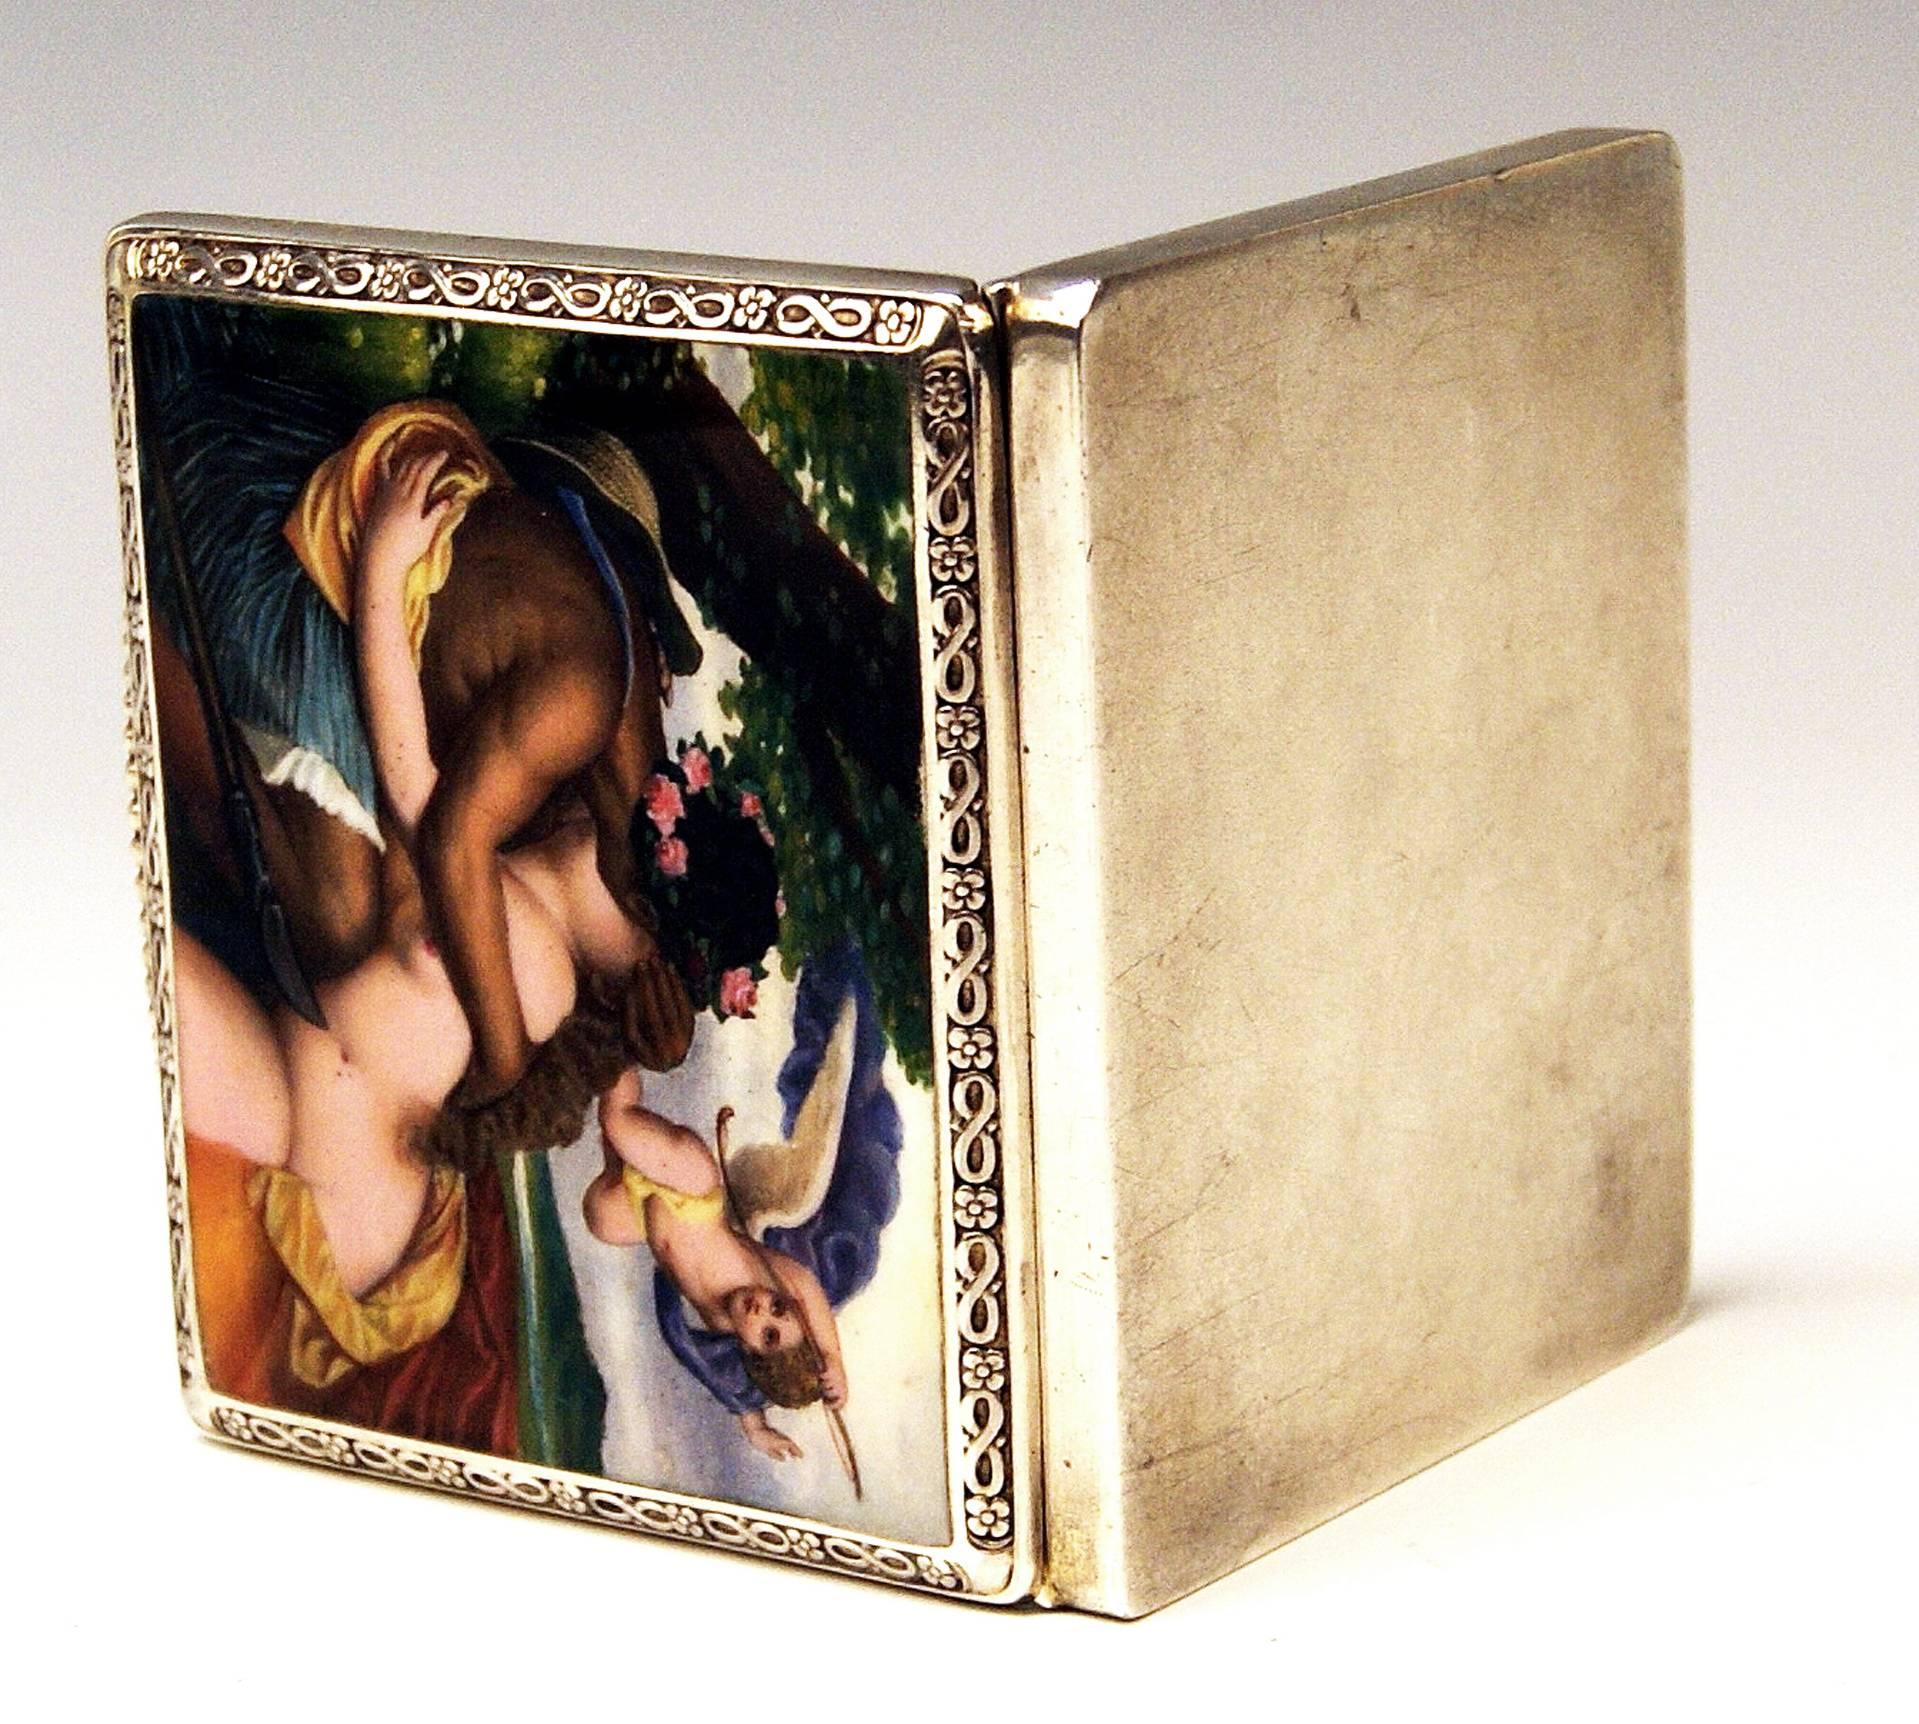 VERY INTERESTING SILVER 800 CIGARETTE BOX / CASE WITH ENAMEL PAINTING COVERING LID:
LOVING COUPLE

The lid is decorated with beautiful enamel picture - following scene is painted there:
A loving couple kisses each other in passionate manner: